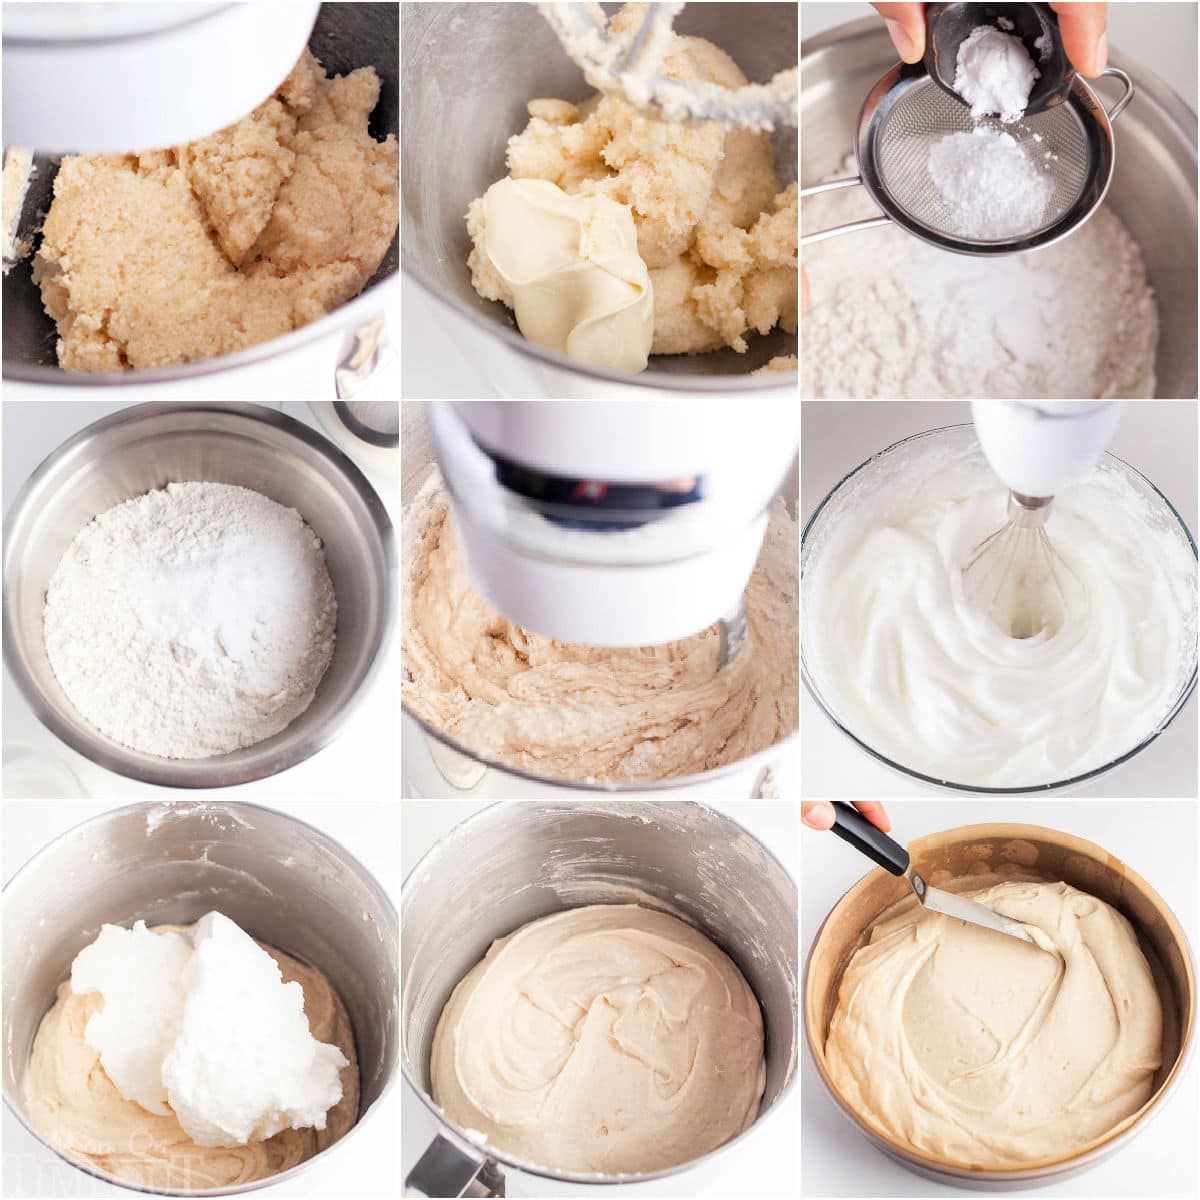 nine image collage showing how to make peppermint cake.